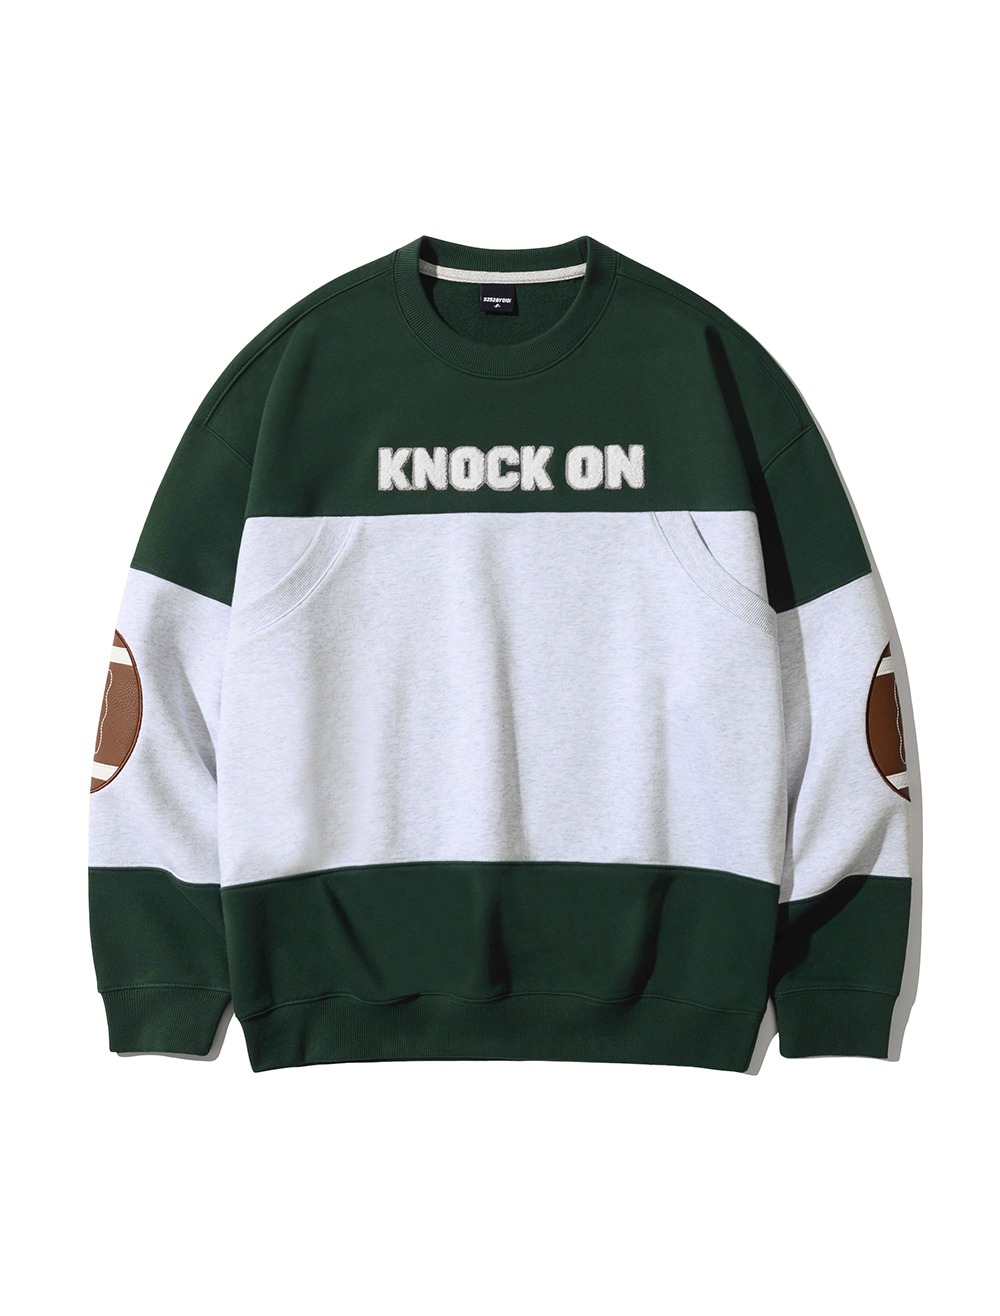 [10TH ANNIV] 2015 KNOCK ON THE JUMPER [GREEN]